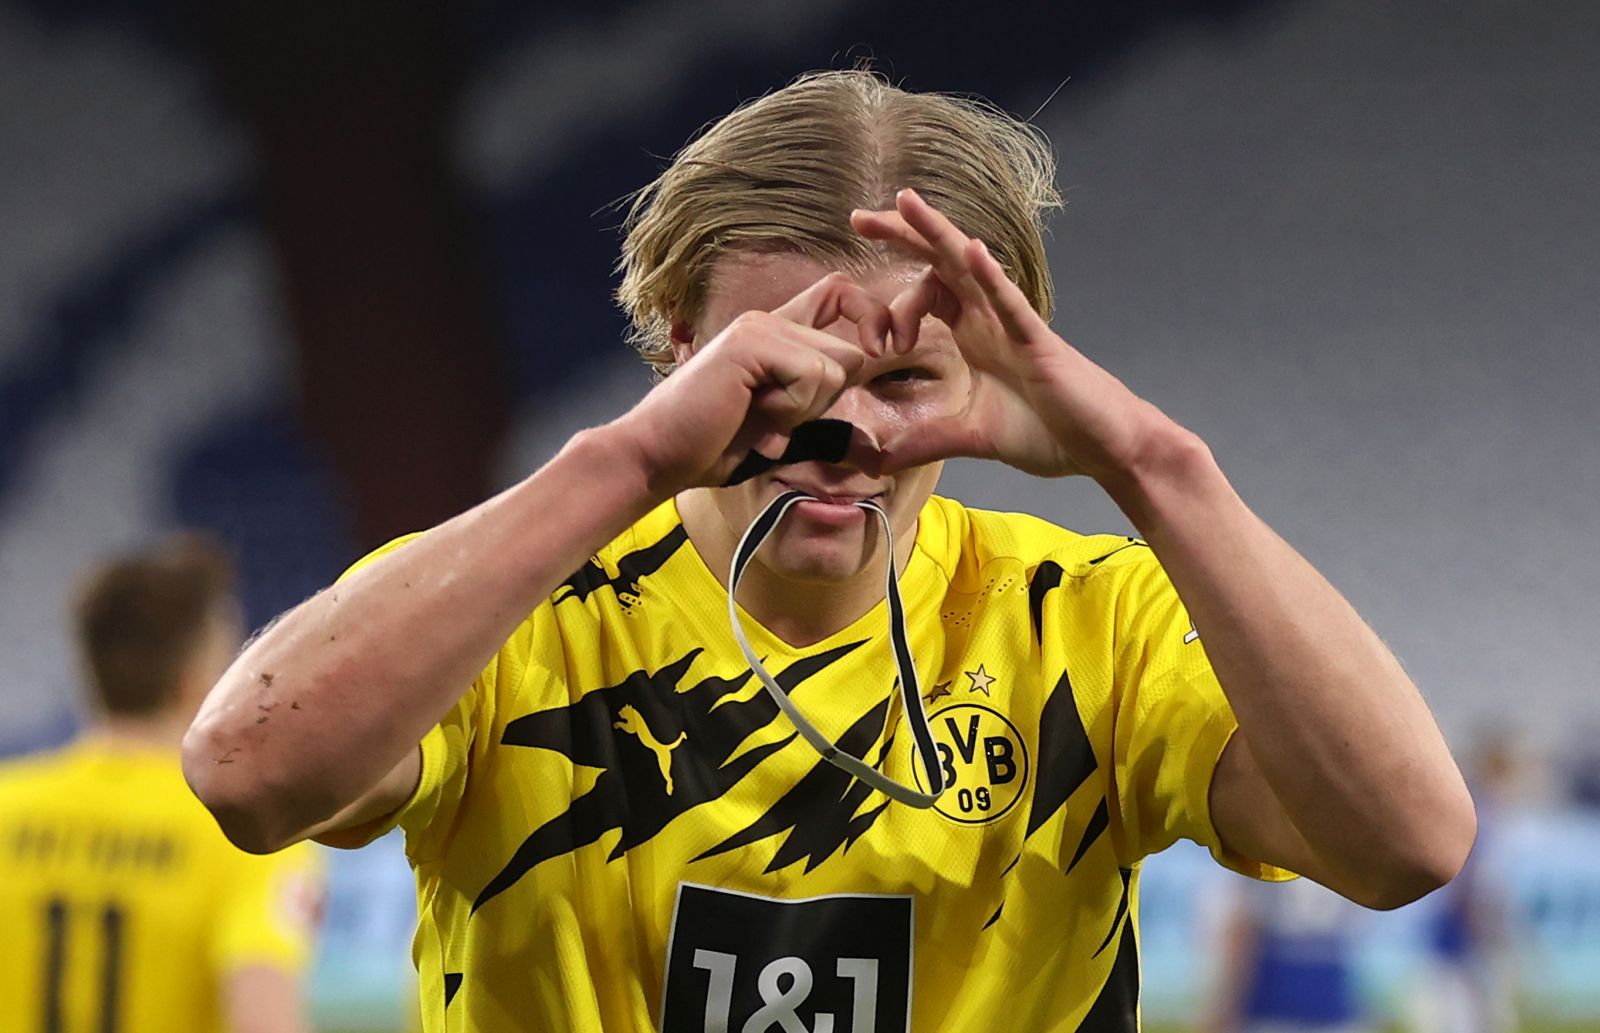 epa09026652 Erling Haaland of Dortmund celebrates after scoring the 2-0 lead during the German Bundesliga soccer match between FC Schalke 04 and Borussia Dortmund in Gelsenkirchen, Germany, 20 February 2021.  EPA/Lars Baron / POOL CONDITIONS - ATTENTION: The DFL regulations prohibit any use of photographs as image sequences and/or quasi-video.